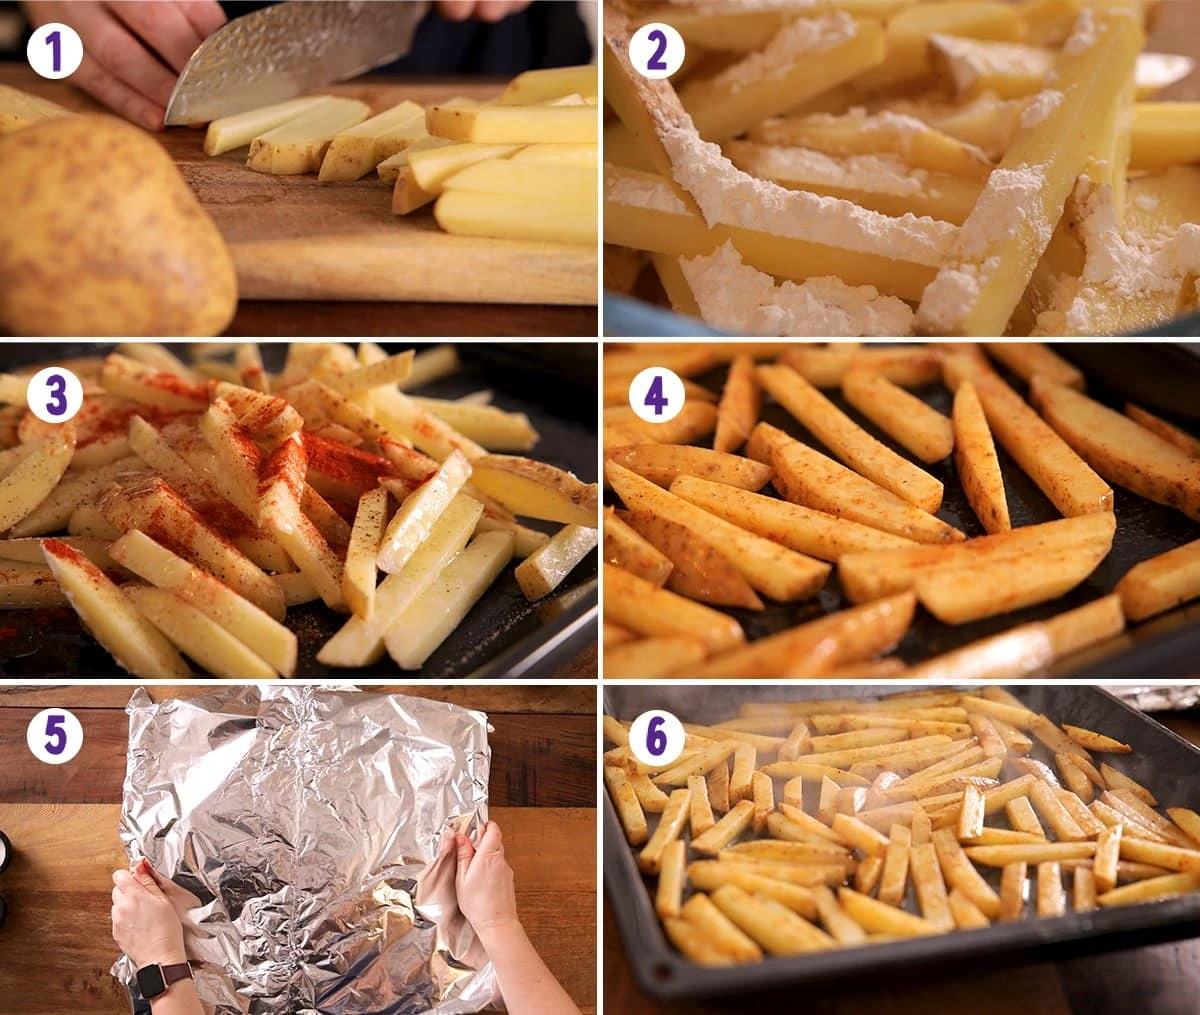 The process of making oven baked chips